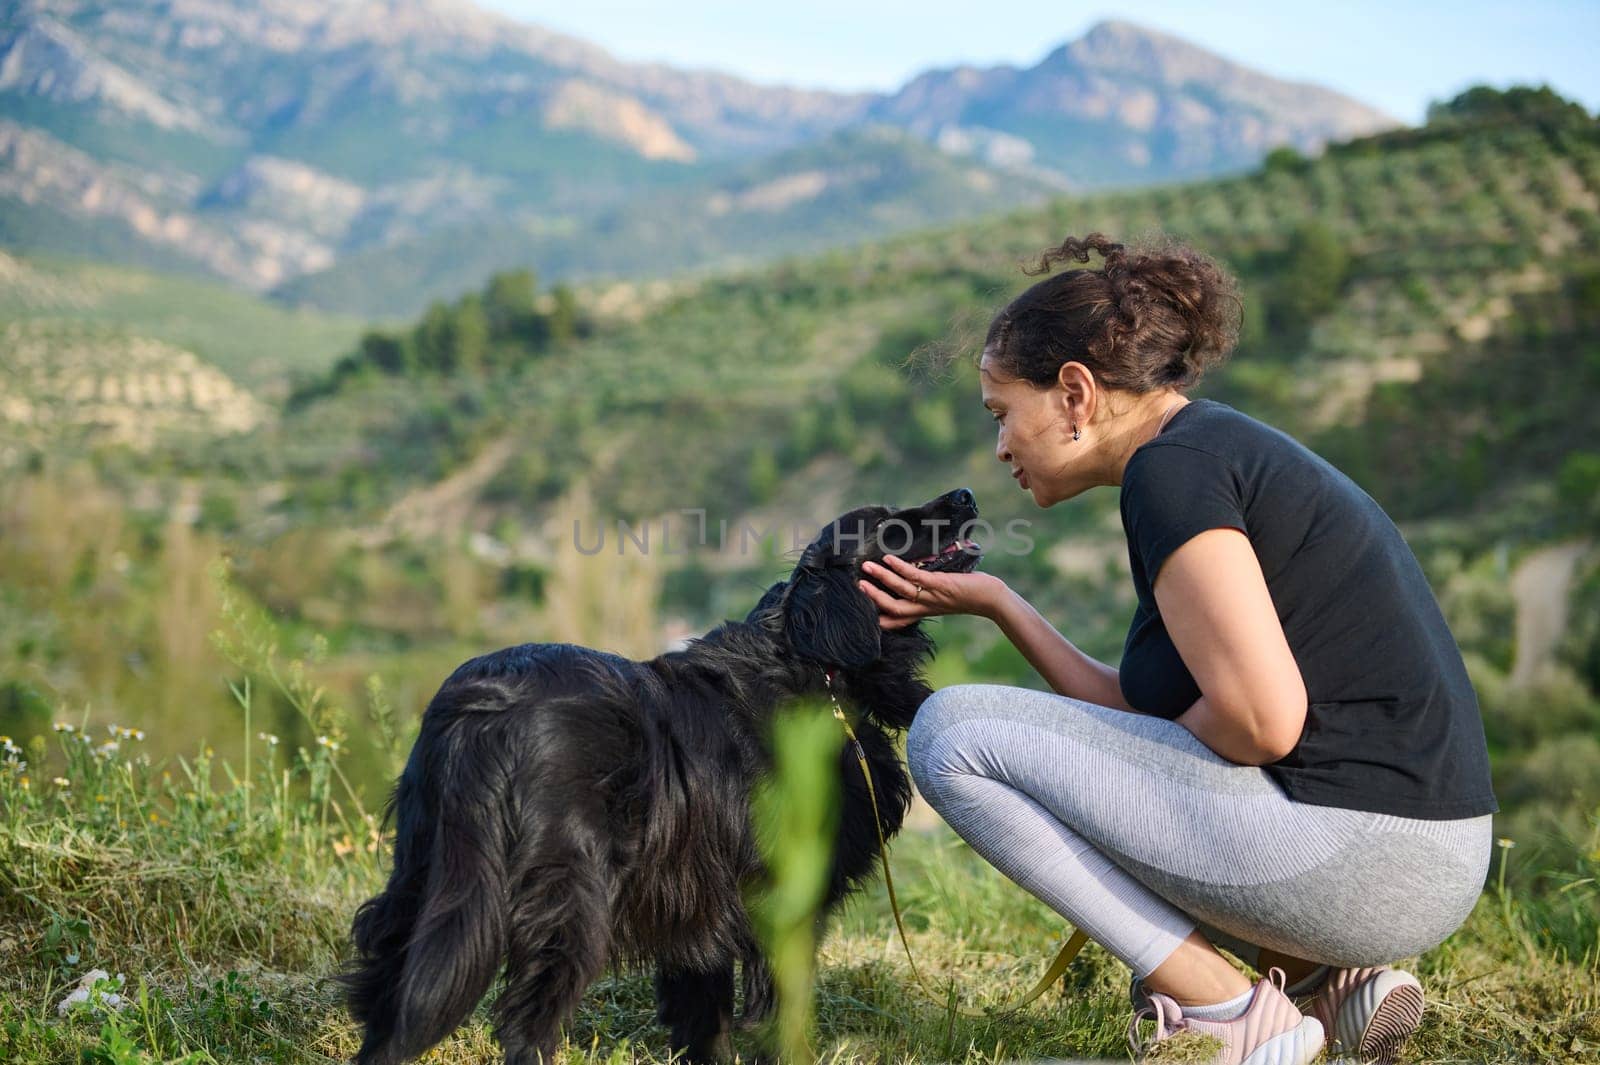 Affectionate young woman embracing her pedigree black cocker spaniel pet dog while walking him in the mountains nature. Playing pets and people concept by artgf